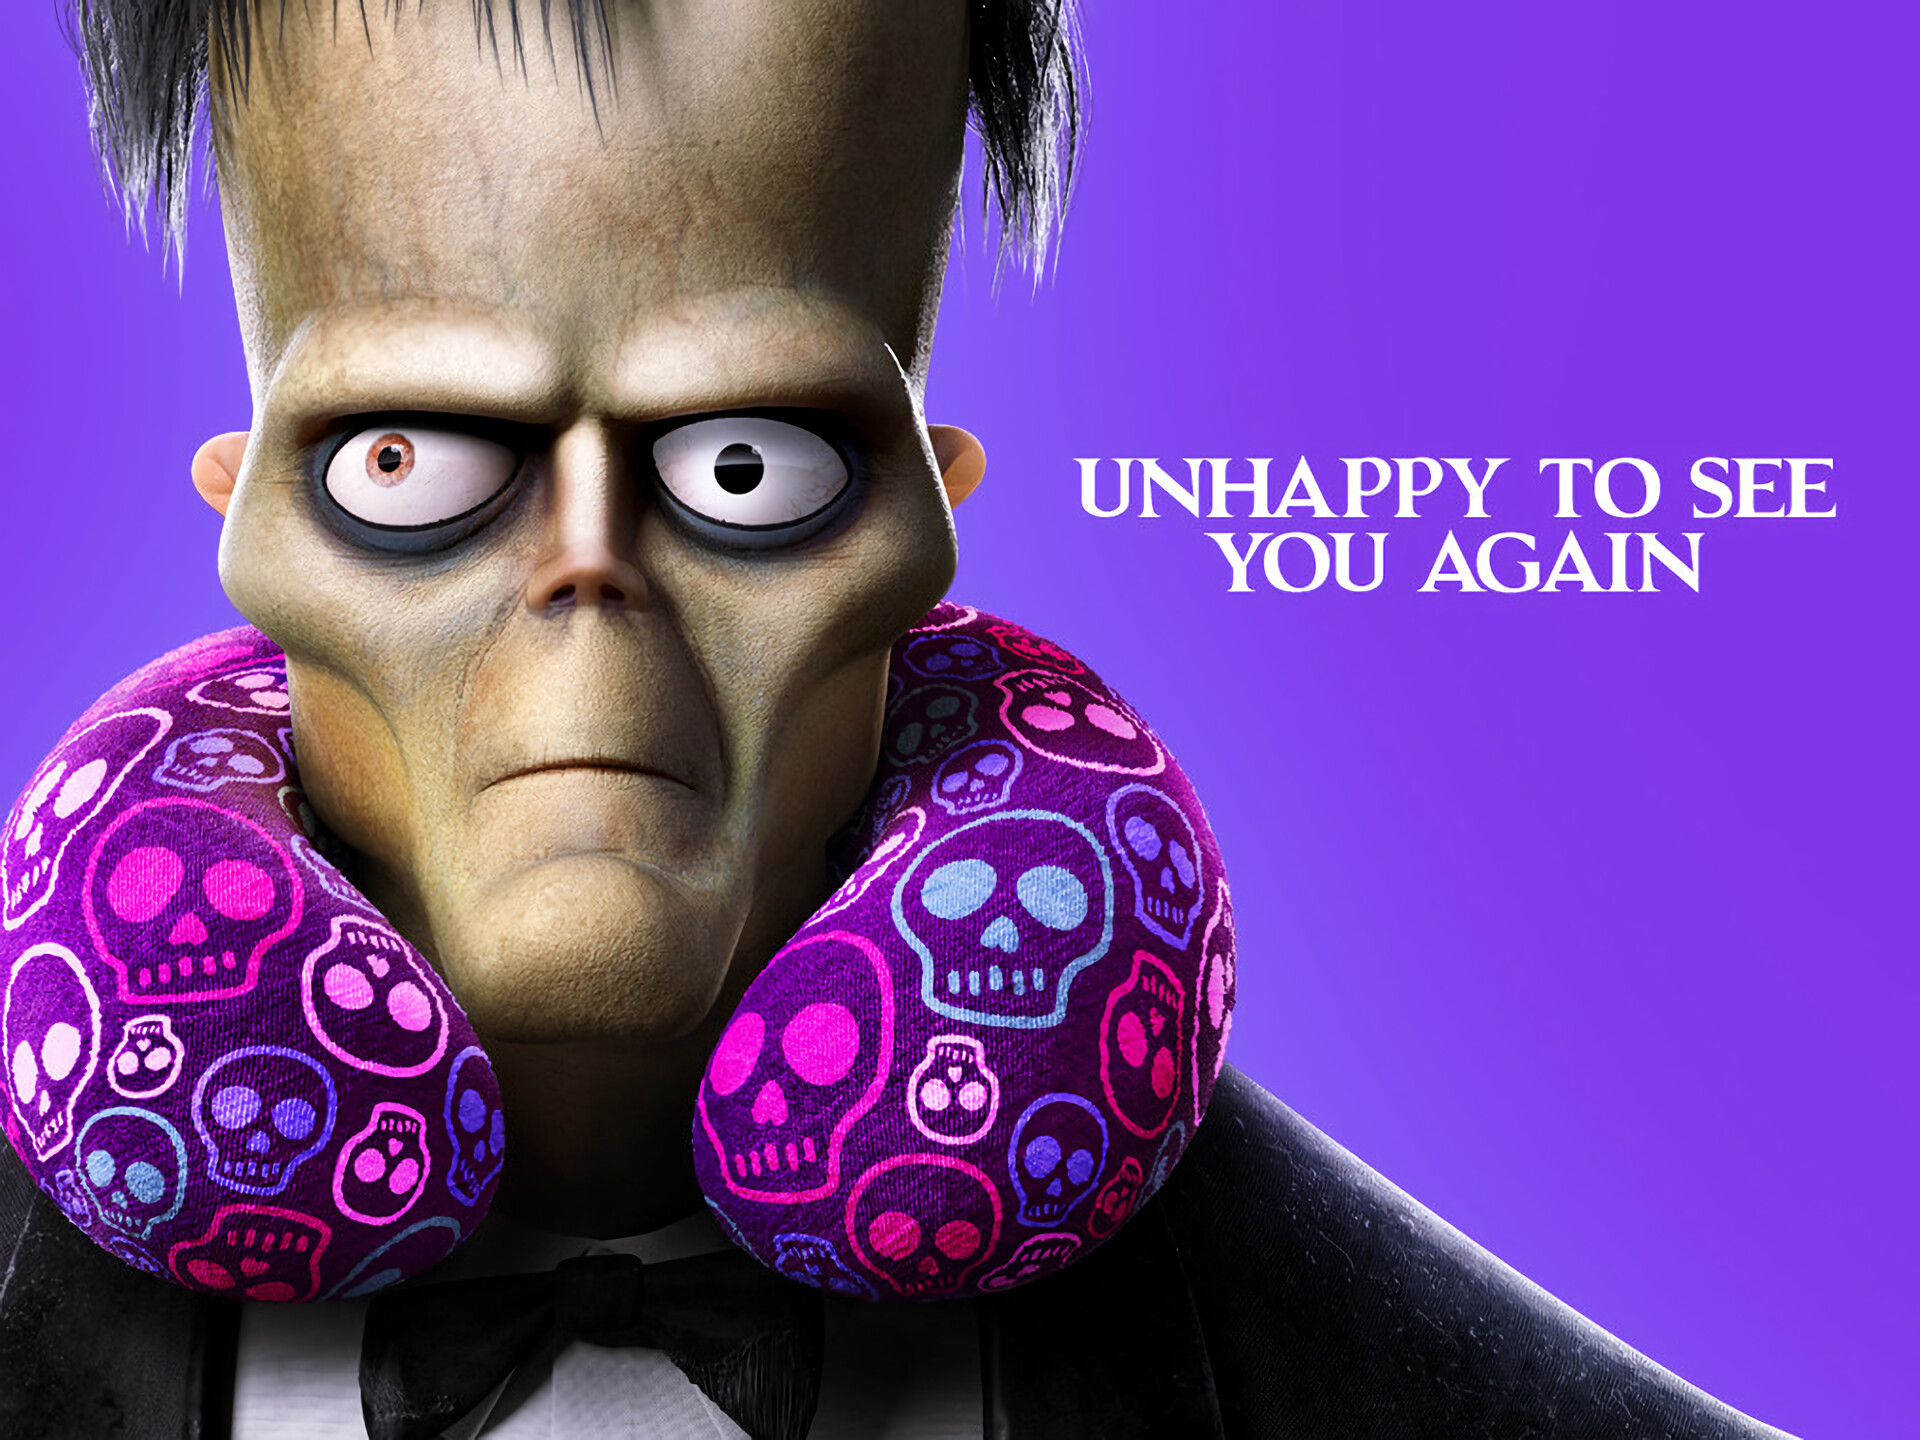 The Addams Family 2: Lurch, One of the protagonists in the comic series, Addams' cartoons. 1920x1440 HD Wallpaper.